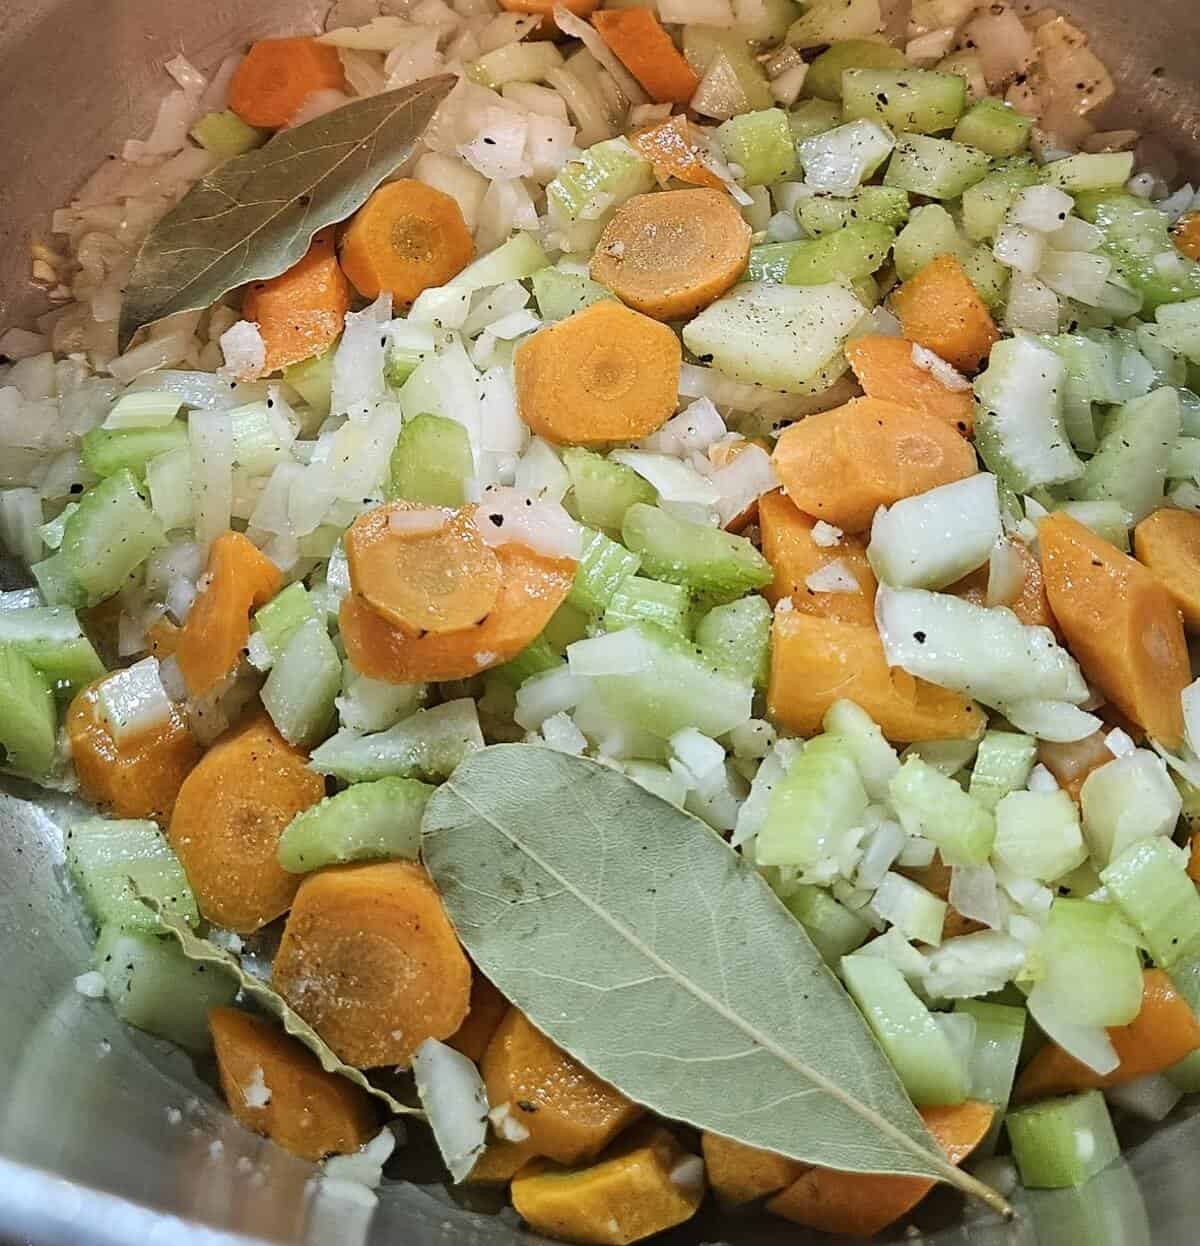 small dice yellow onion, bay leaves, sliced carrot, small diced celery, minced garlic, coarse salt, and ground black pepper in a mixing bowl